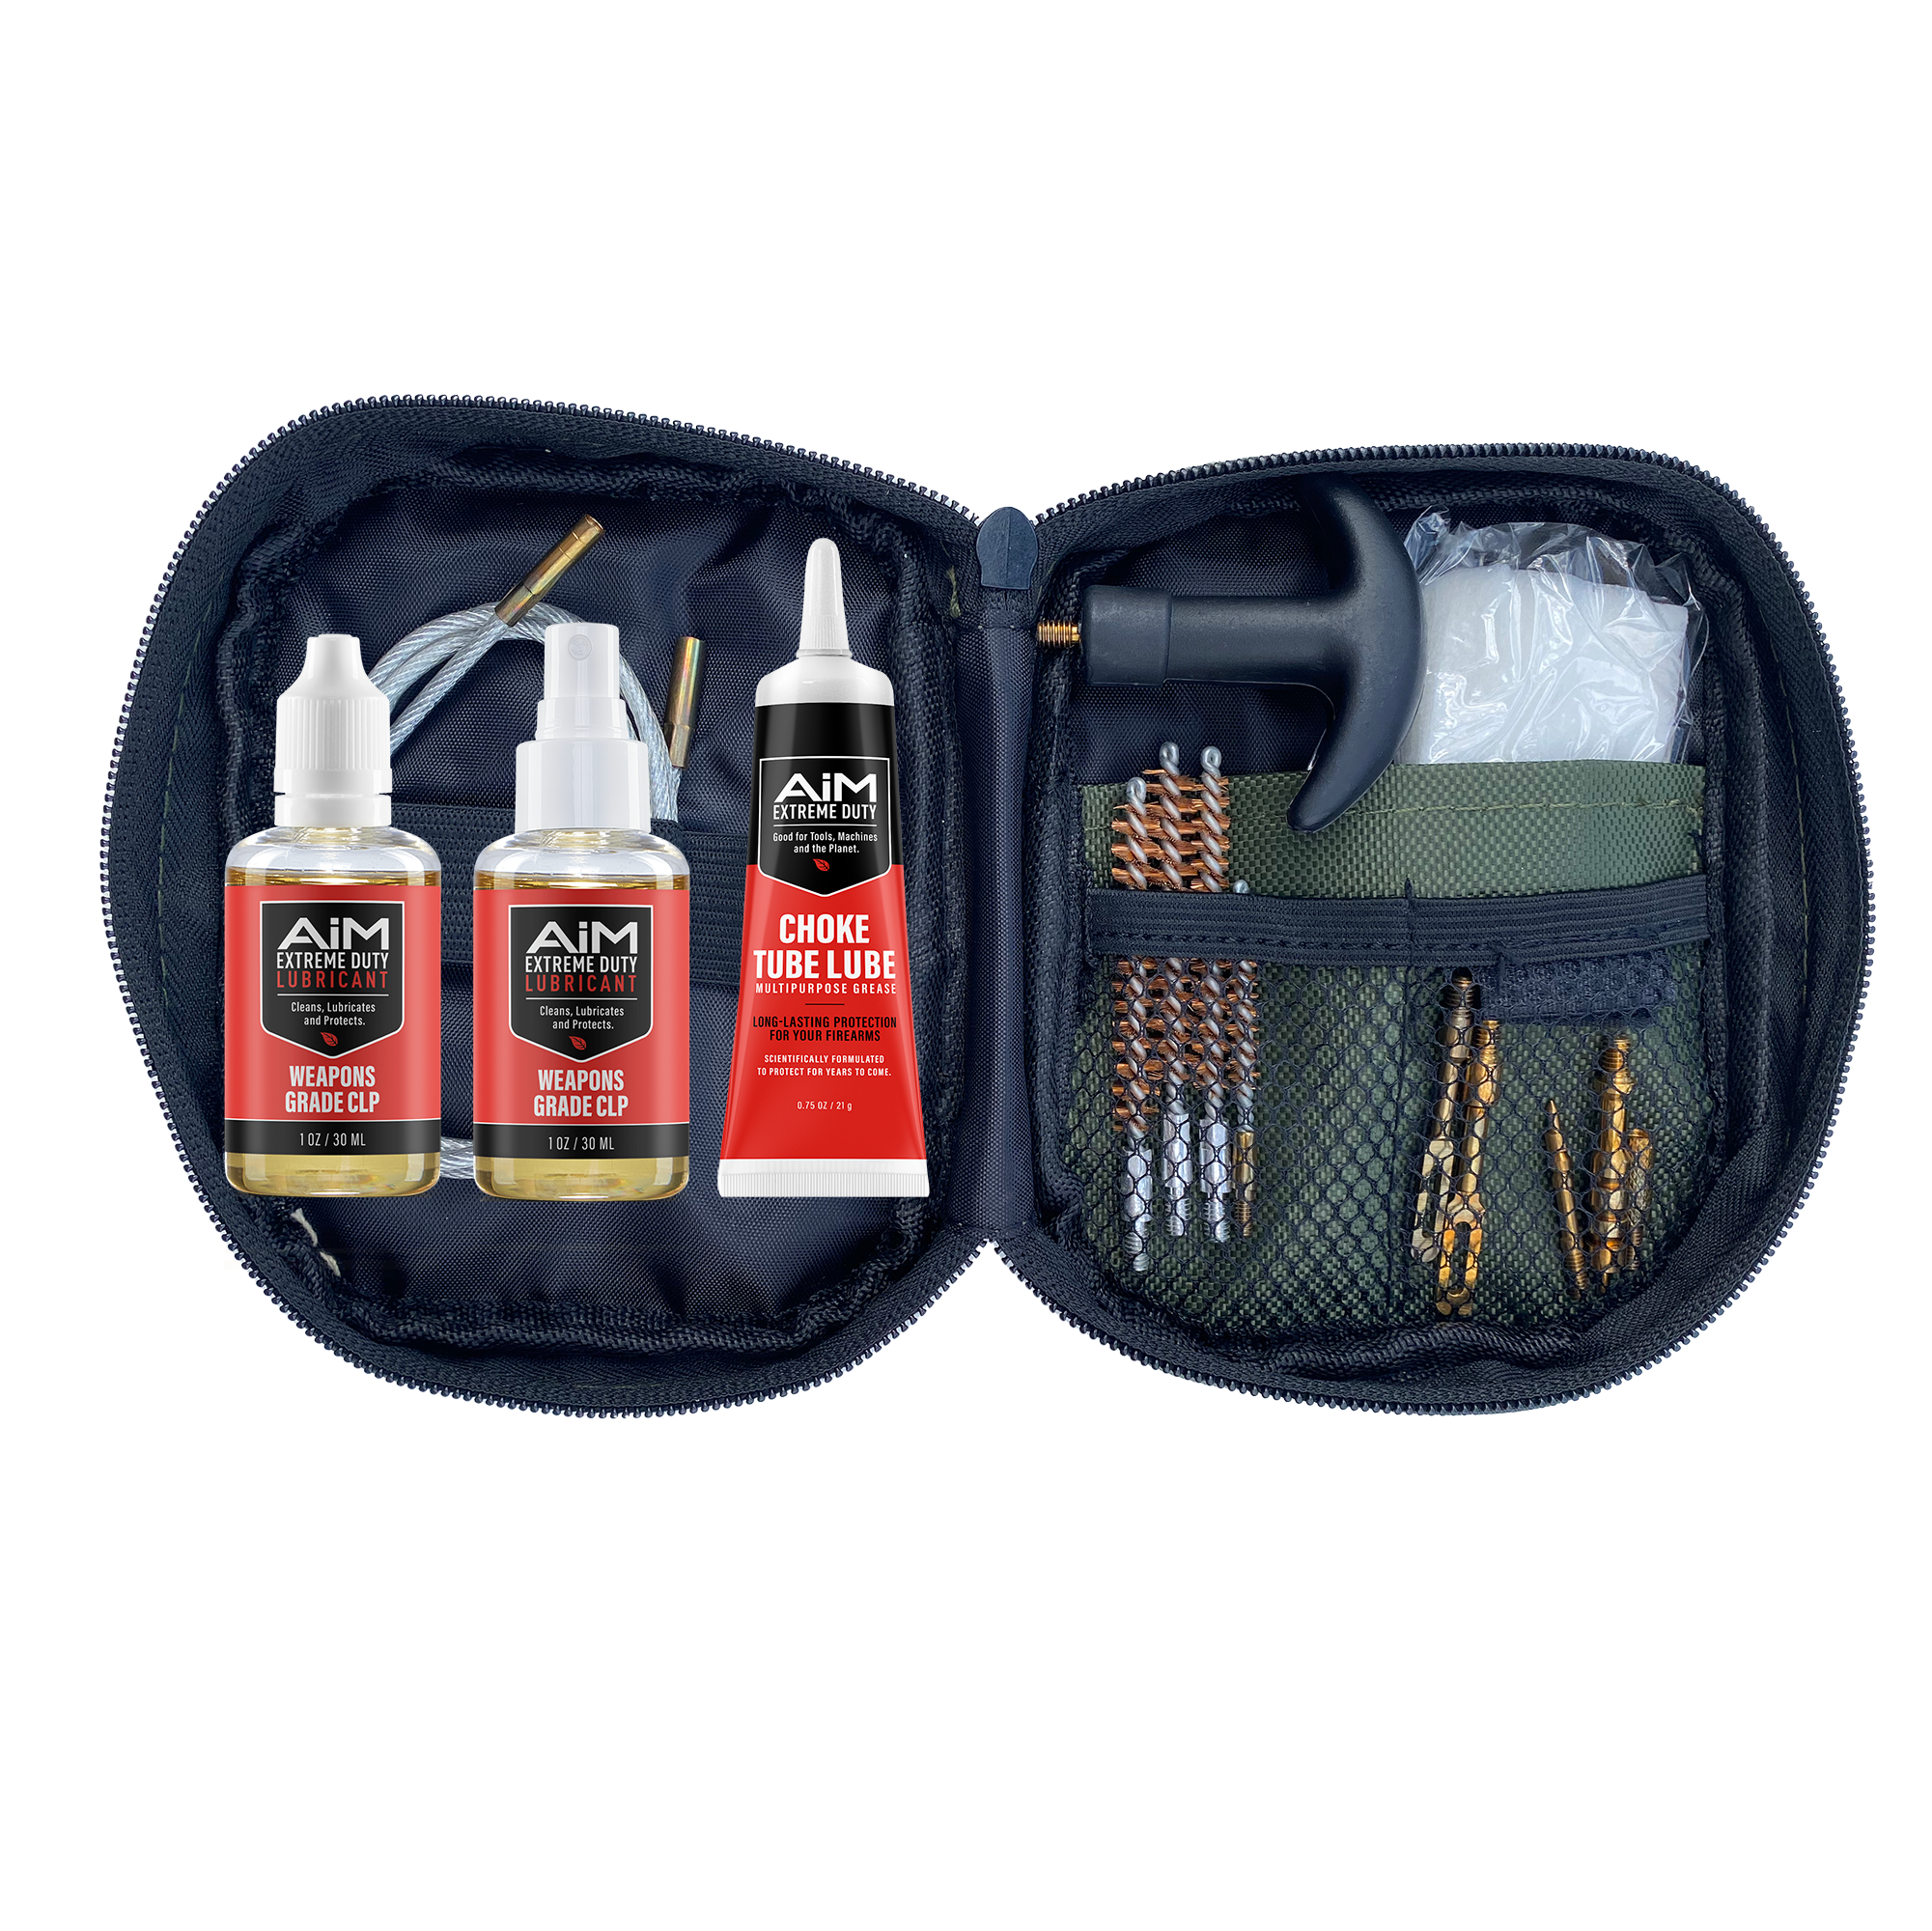 AIM Weapons Grade CLP Rifle Cleaning Kit